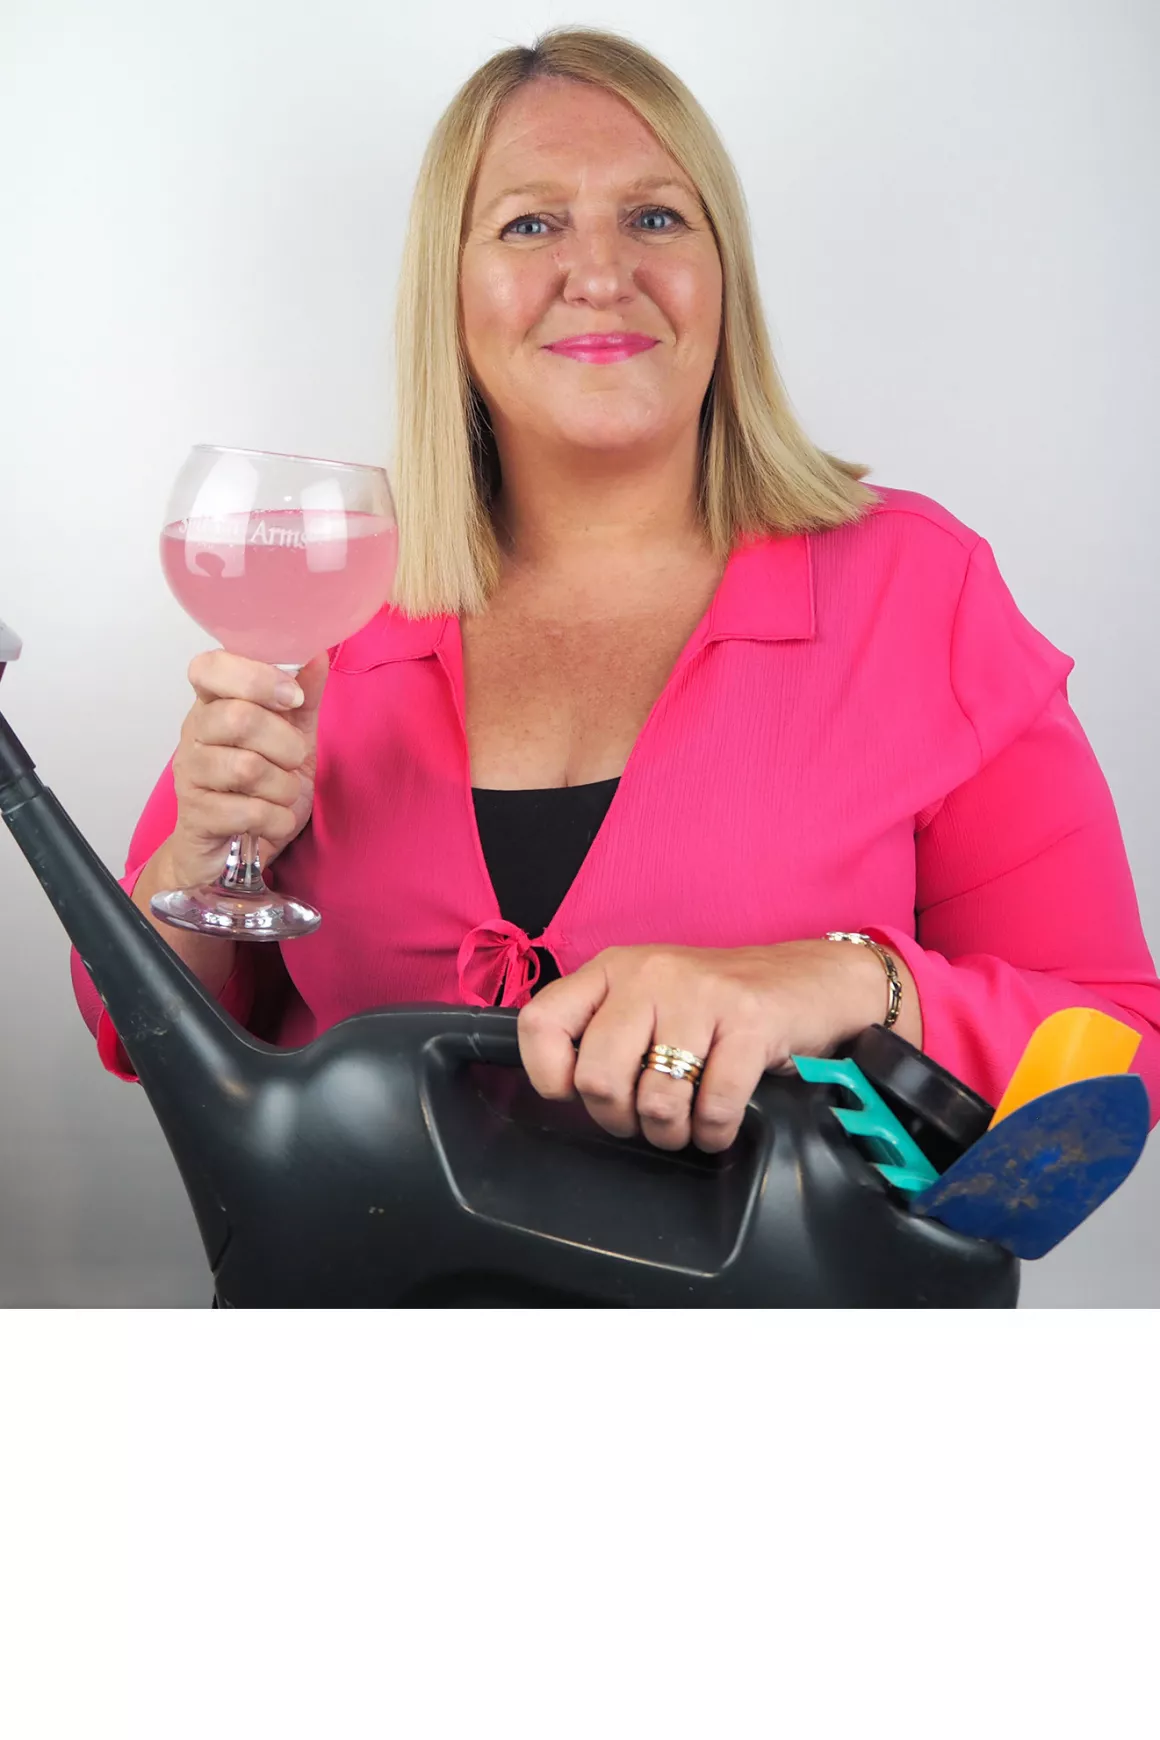 Louise Sutton (accounts) wearing pink top, holding glass of wine and holding gardening props, photo taken at Prime Appointments HQ in Witham 2